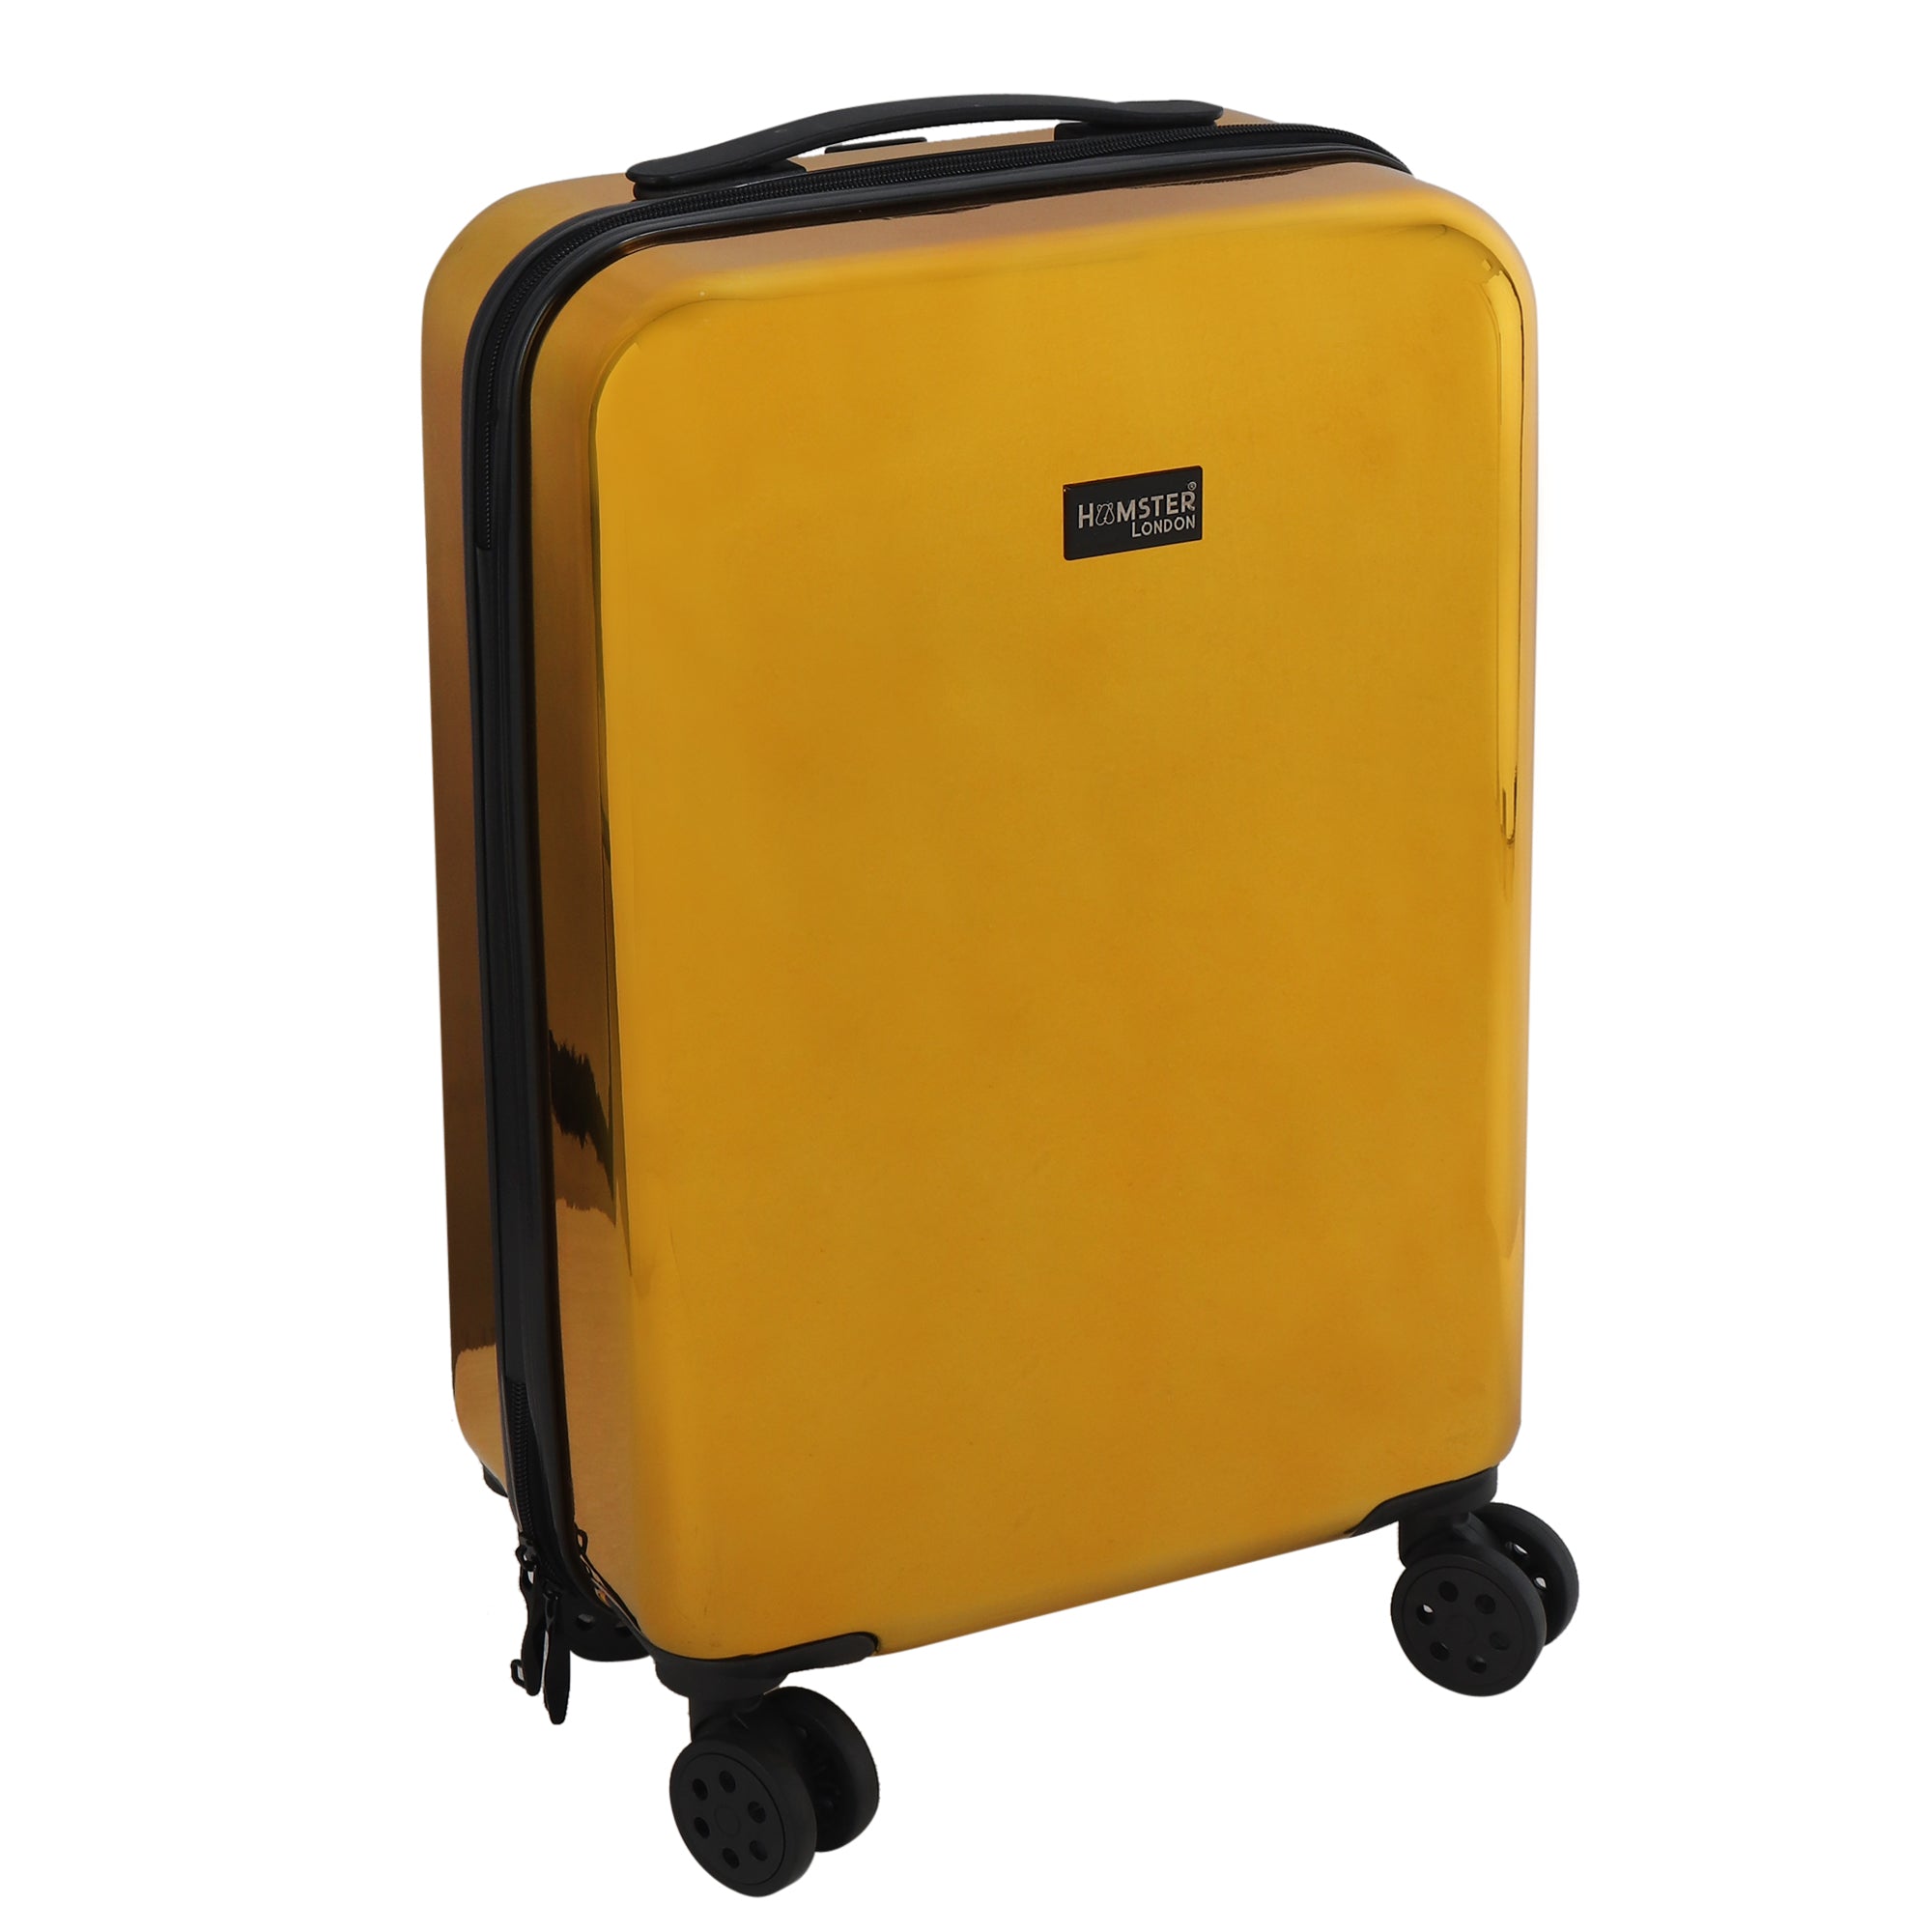 HL Vintage Suitcase/ 55 Cms ABS+ Polycarbonate Mirror Finish Hardsided Cabin Luggage ( Gold) With Duffle Bag Black Combo